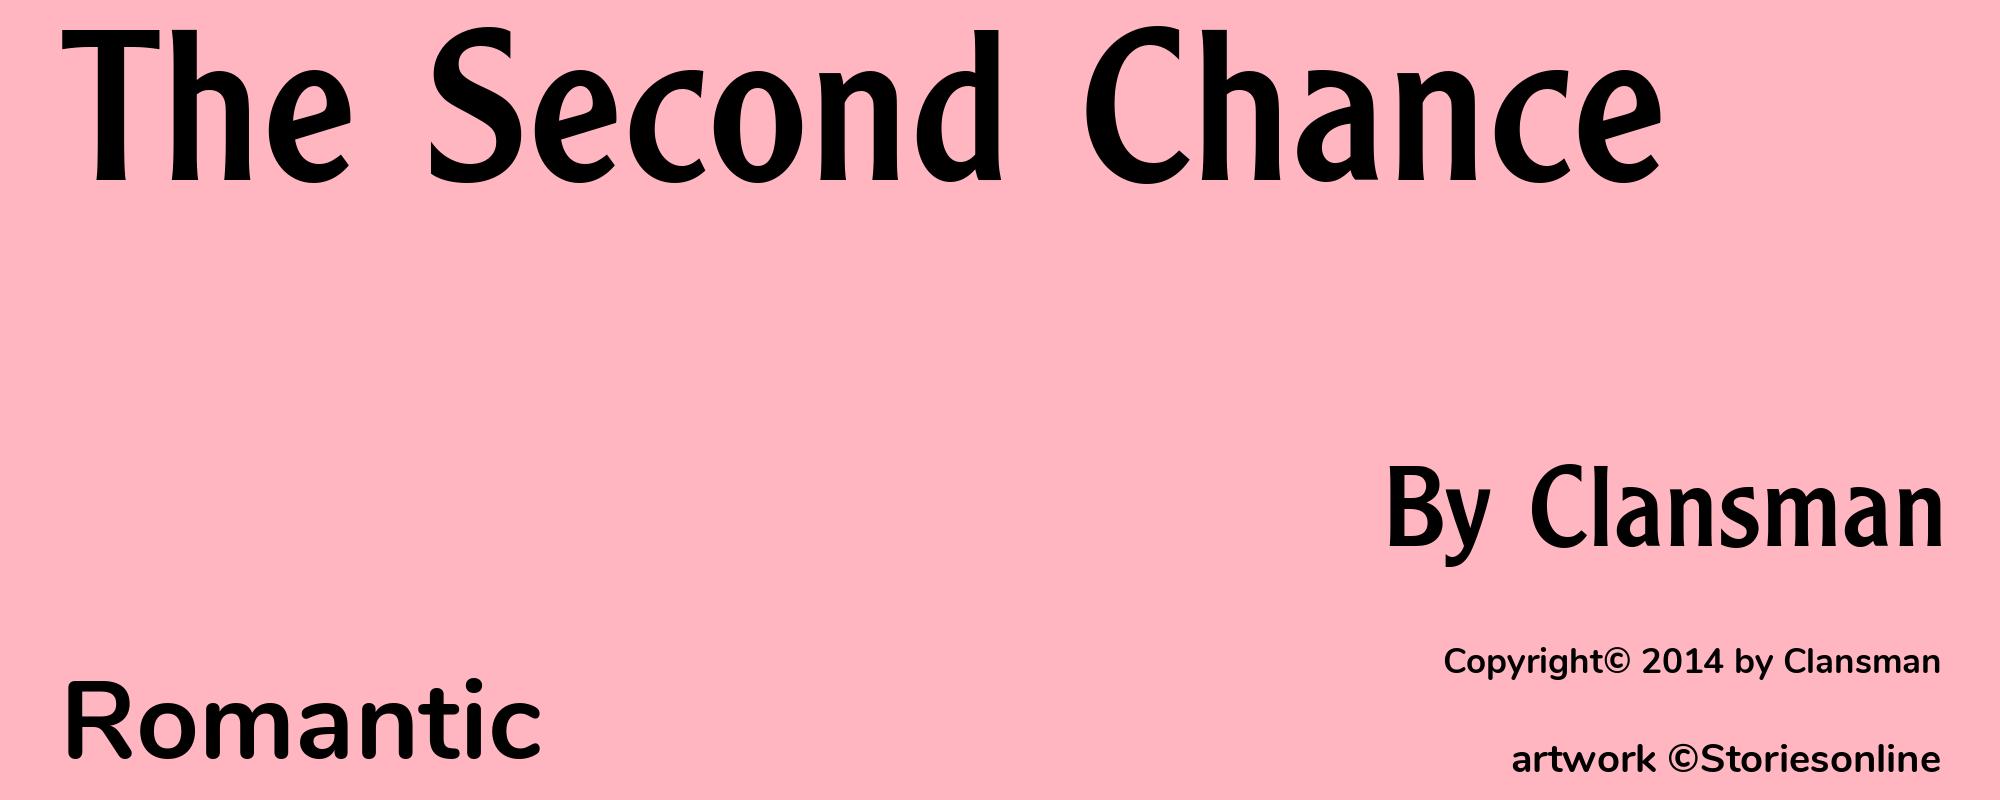 The Second Chance - Cover